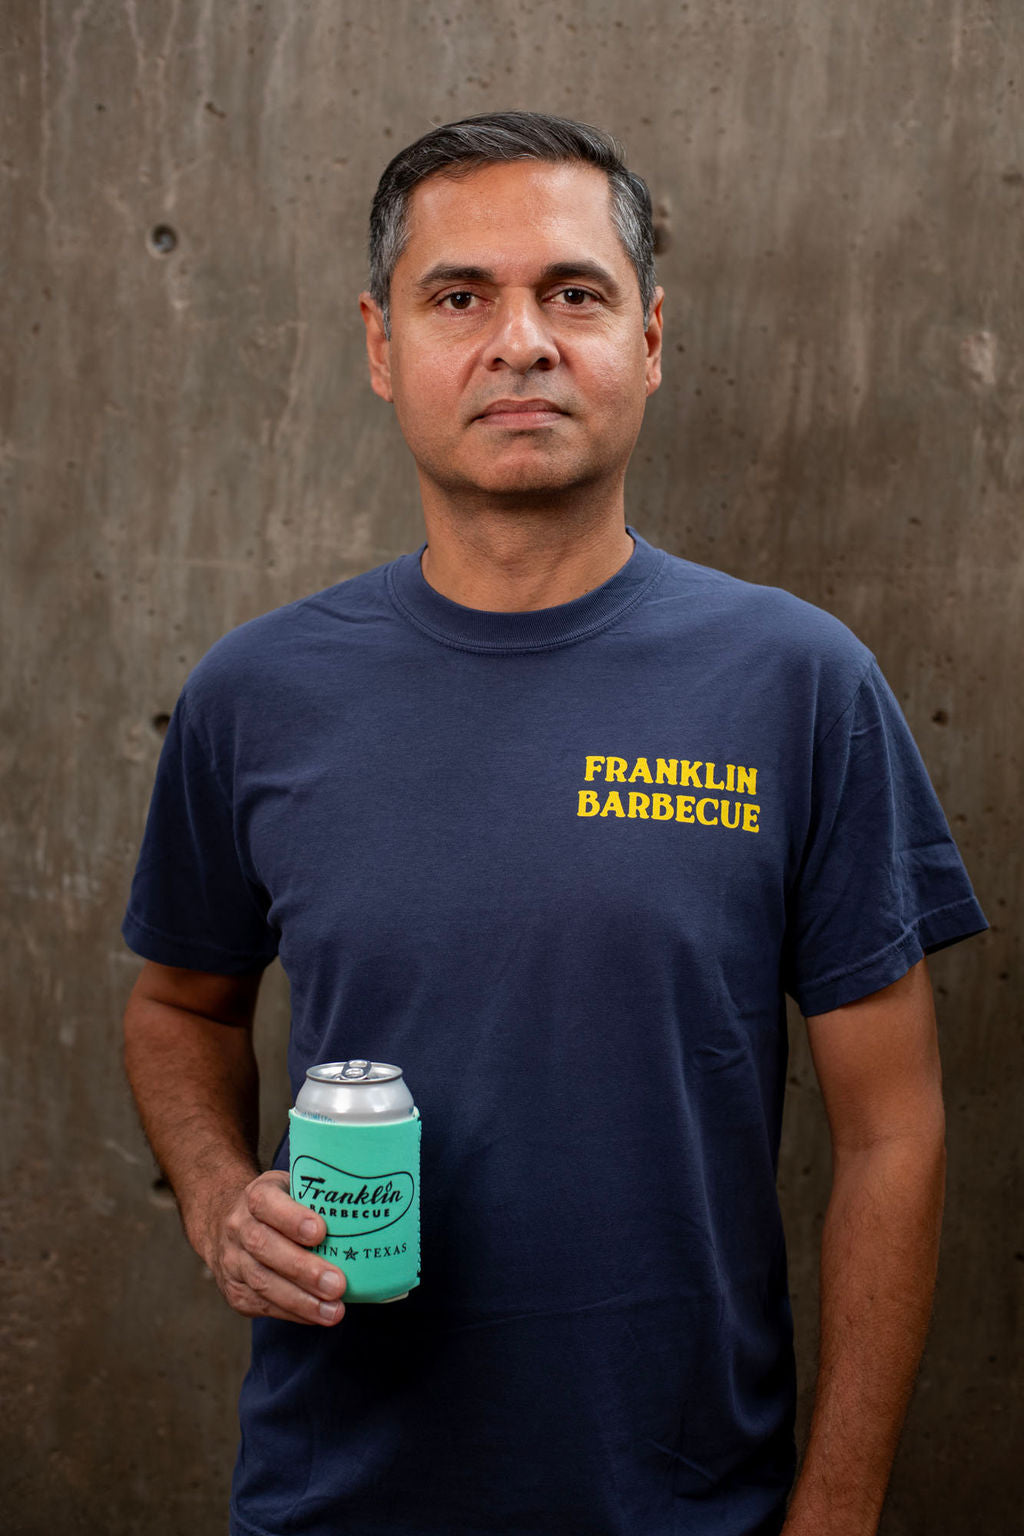 Man in front of a cement wall. He wears the navy blue t-shirt. "Franklin Barbecue" is printed in yellow on the top left side of the shirt. He is also holding a beer covered with our insulated coldie holdie that has our logo on it.